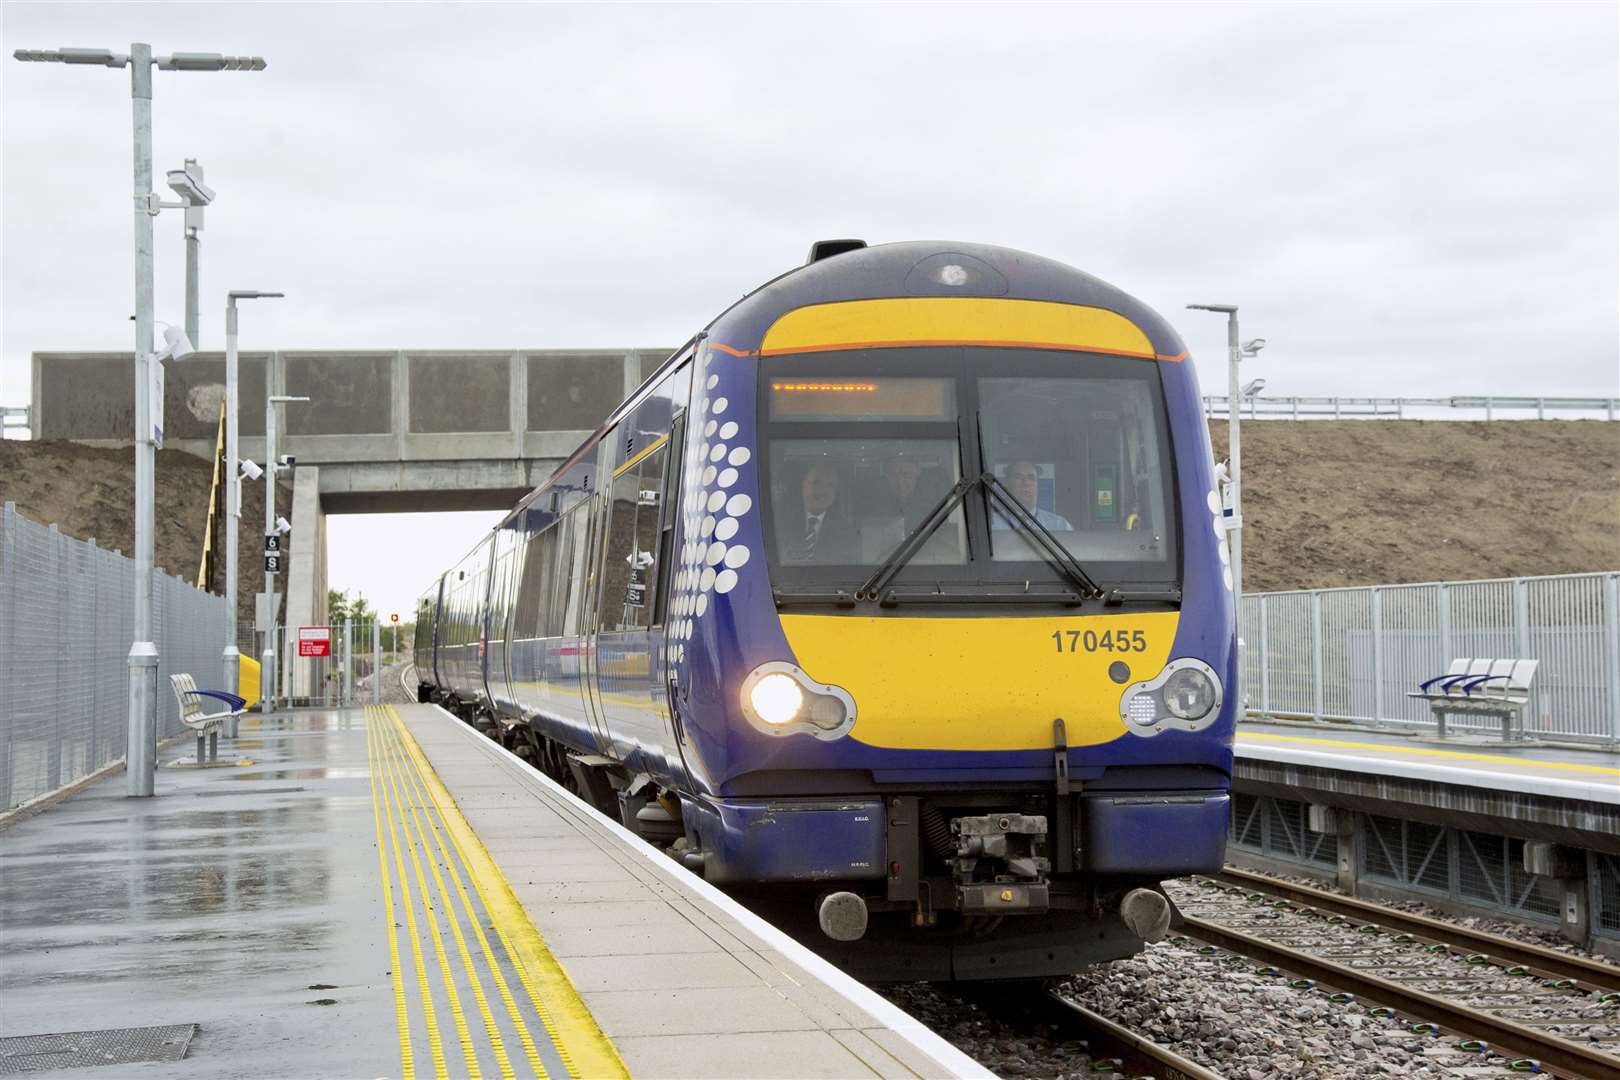 Rail travellers are urged to check the latest on services before starting their journey.